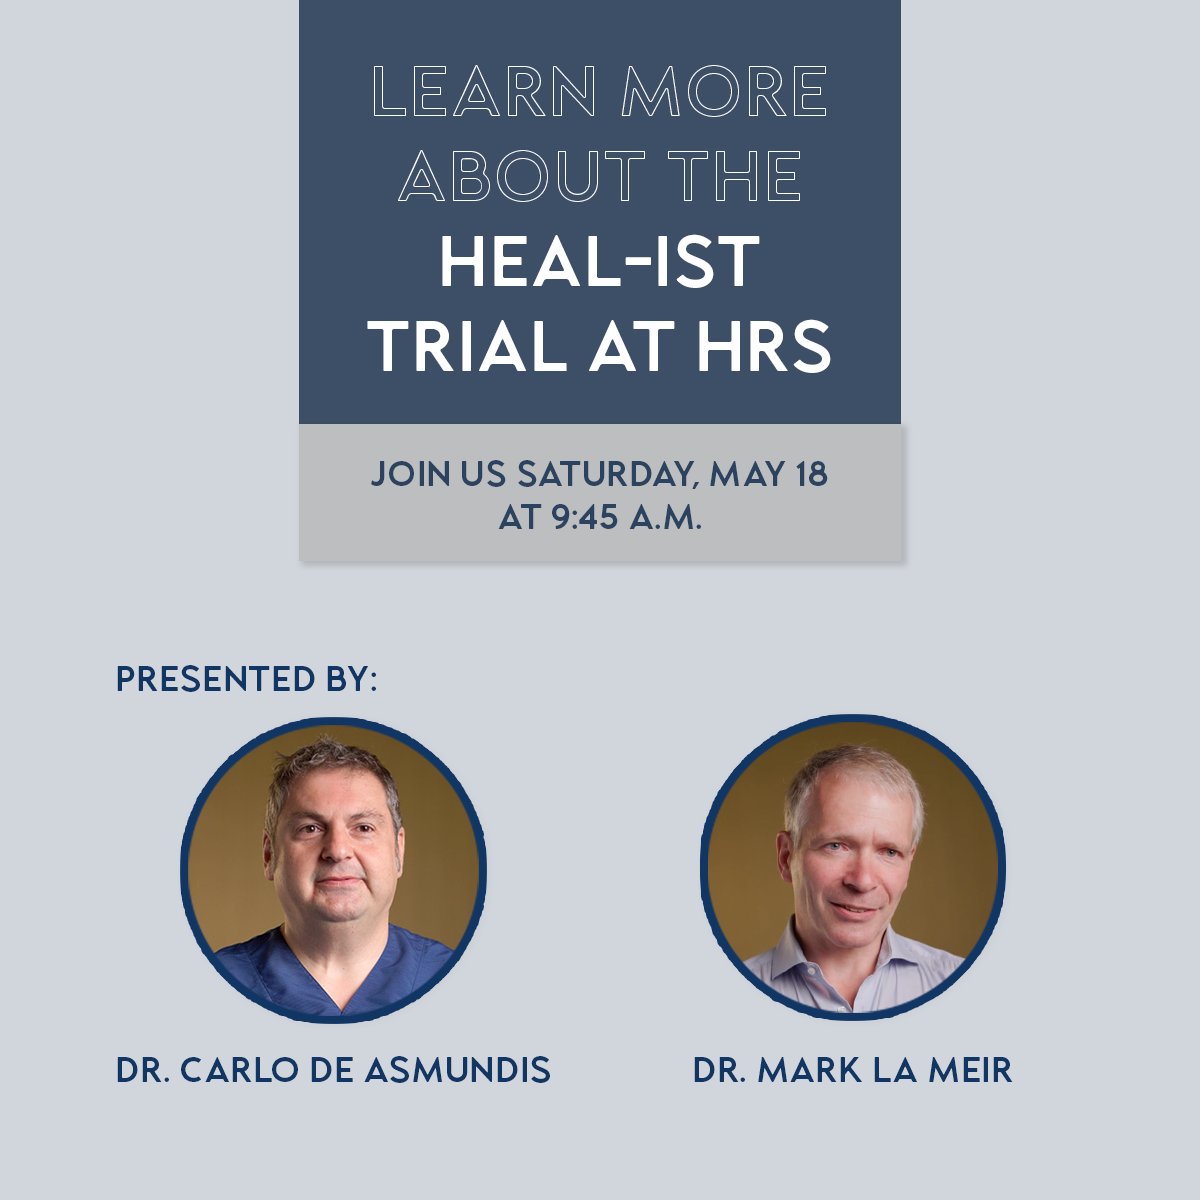 EPs & cardiac surgeons unite in the HEAL-IST trial, evaluating hybrid ablation for symptomatic IST. Join Drs. De Asmundis & La Meir at #HRS2024 on Saturday at 9:45 a.m., booth #1035, to explore this groundbreaking study & EPs' pivotal role. Learn more:  okt.to/QNbXL0